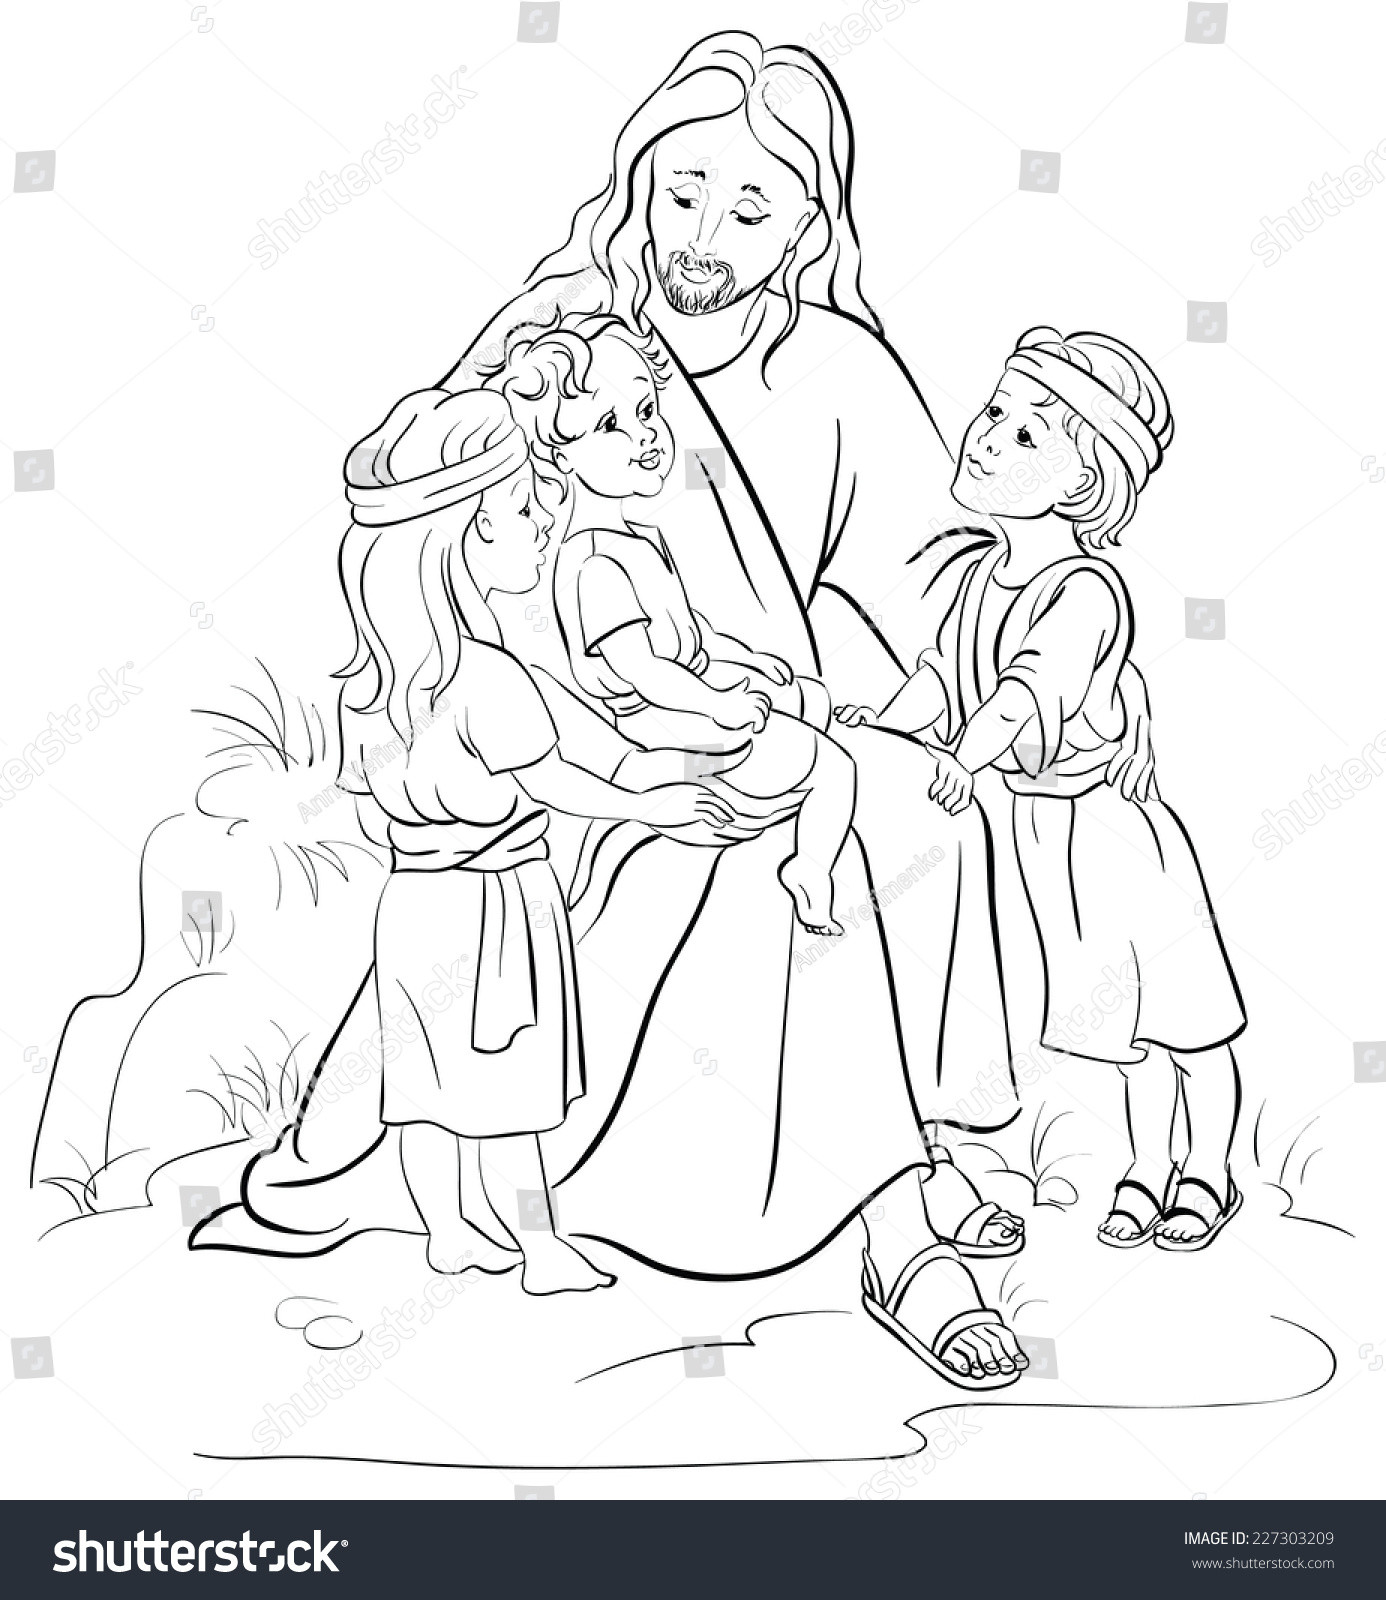 Jesus And The Children Coloring Page
 Bible Story Jesus Children Coloring Page Stock Vector